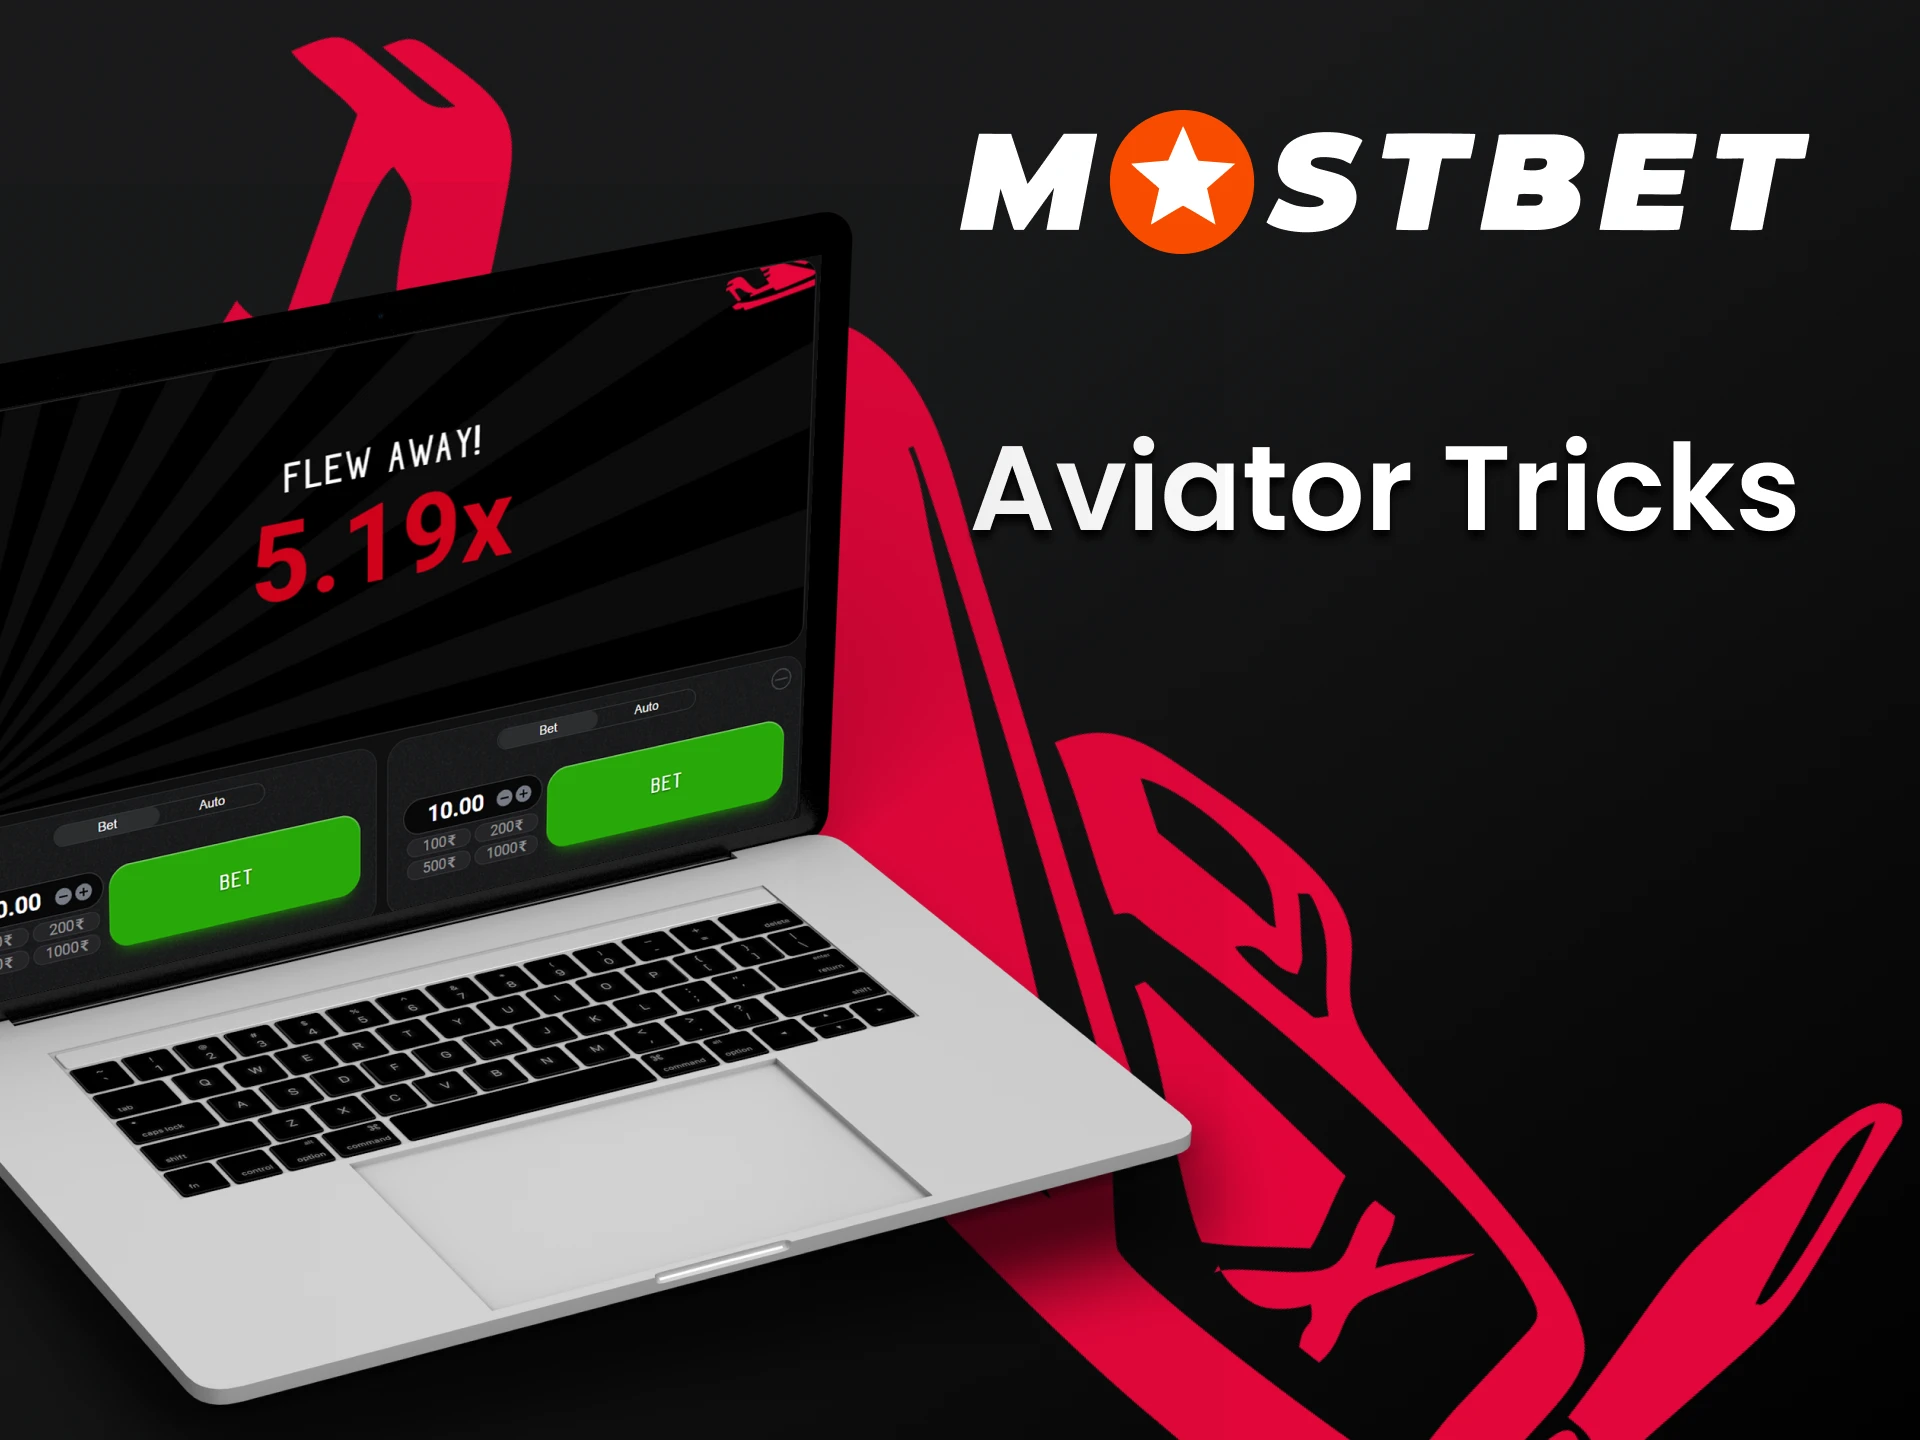 Learn additional skills to win in the game Aviator from Mostbet.